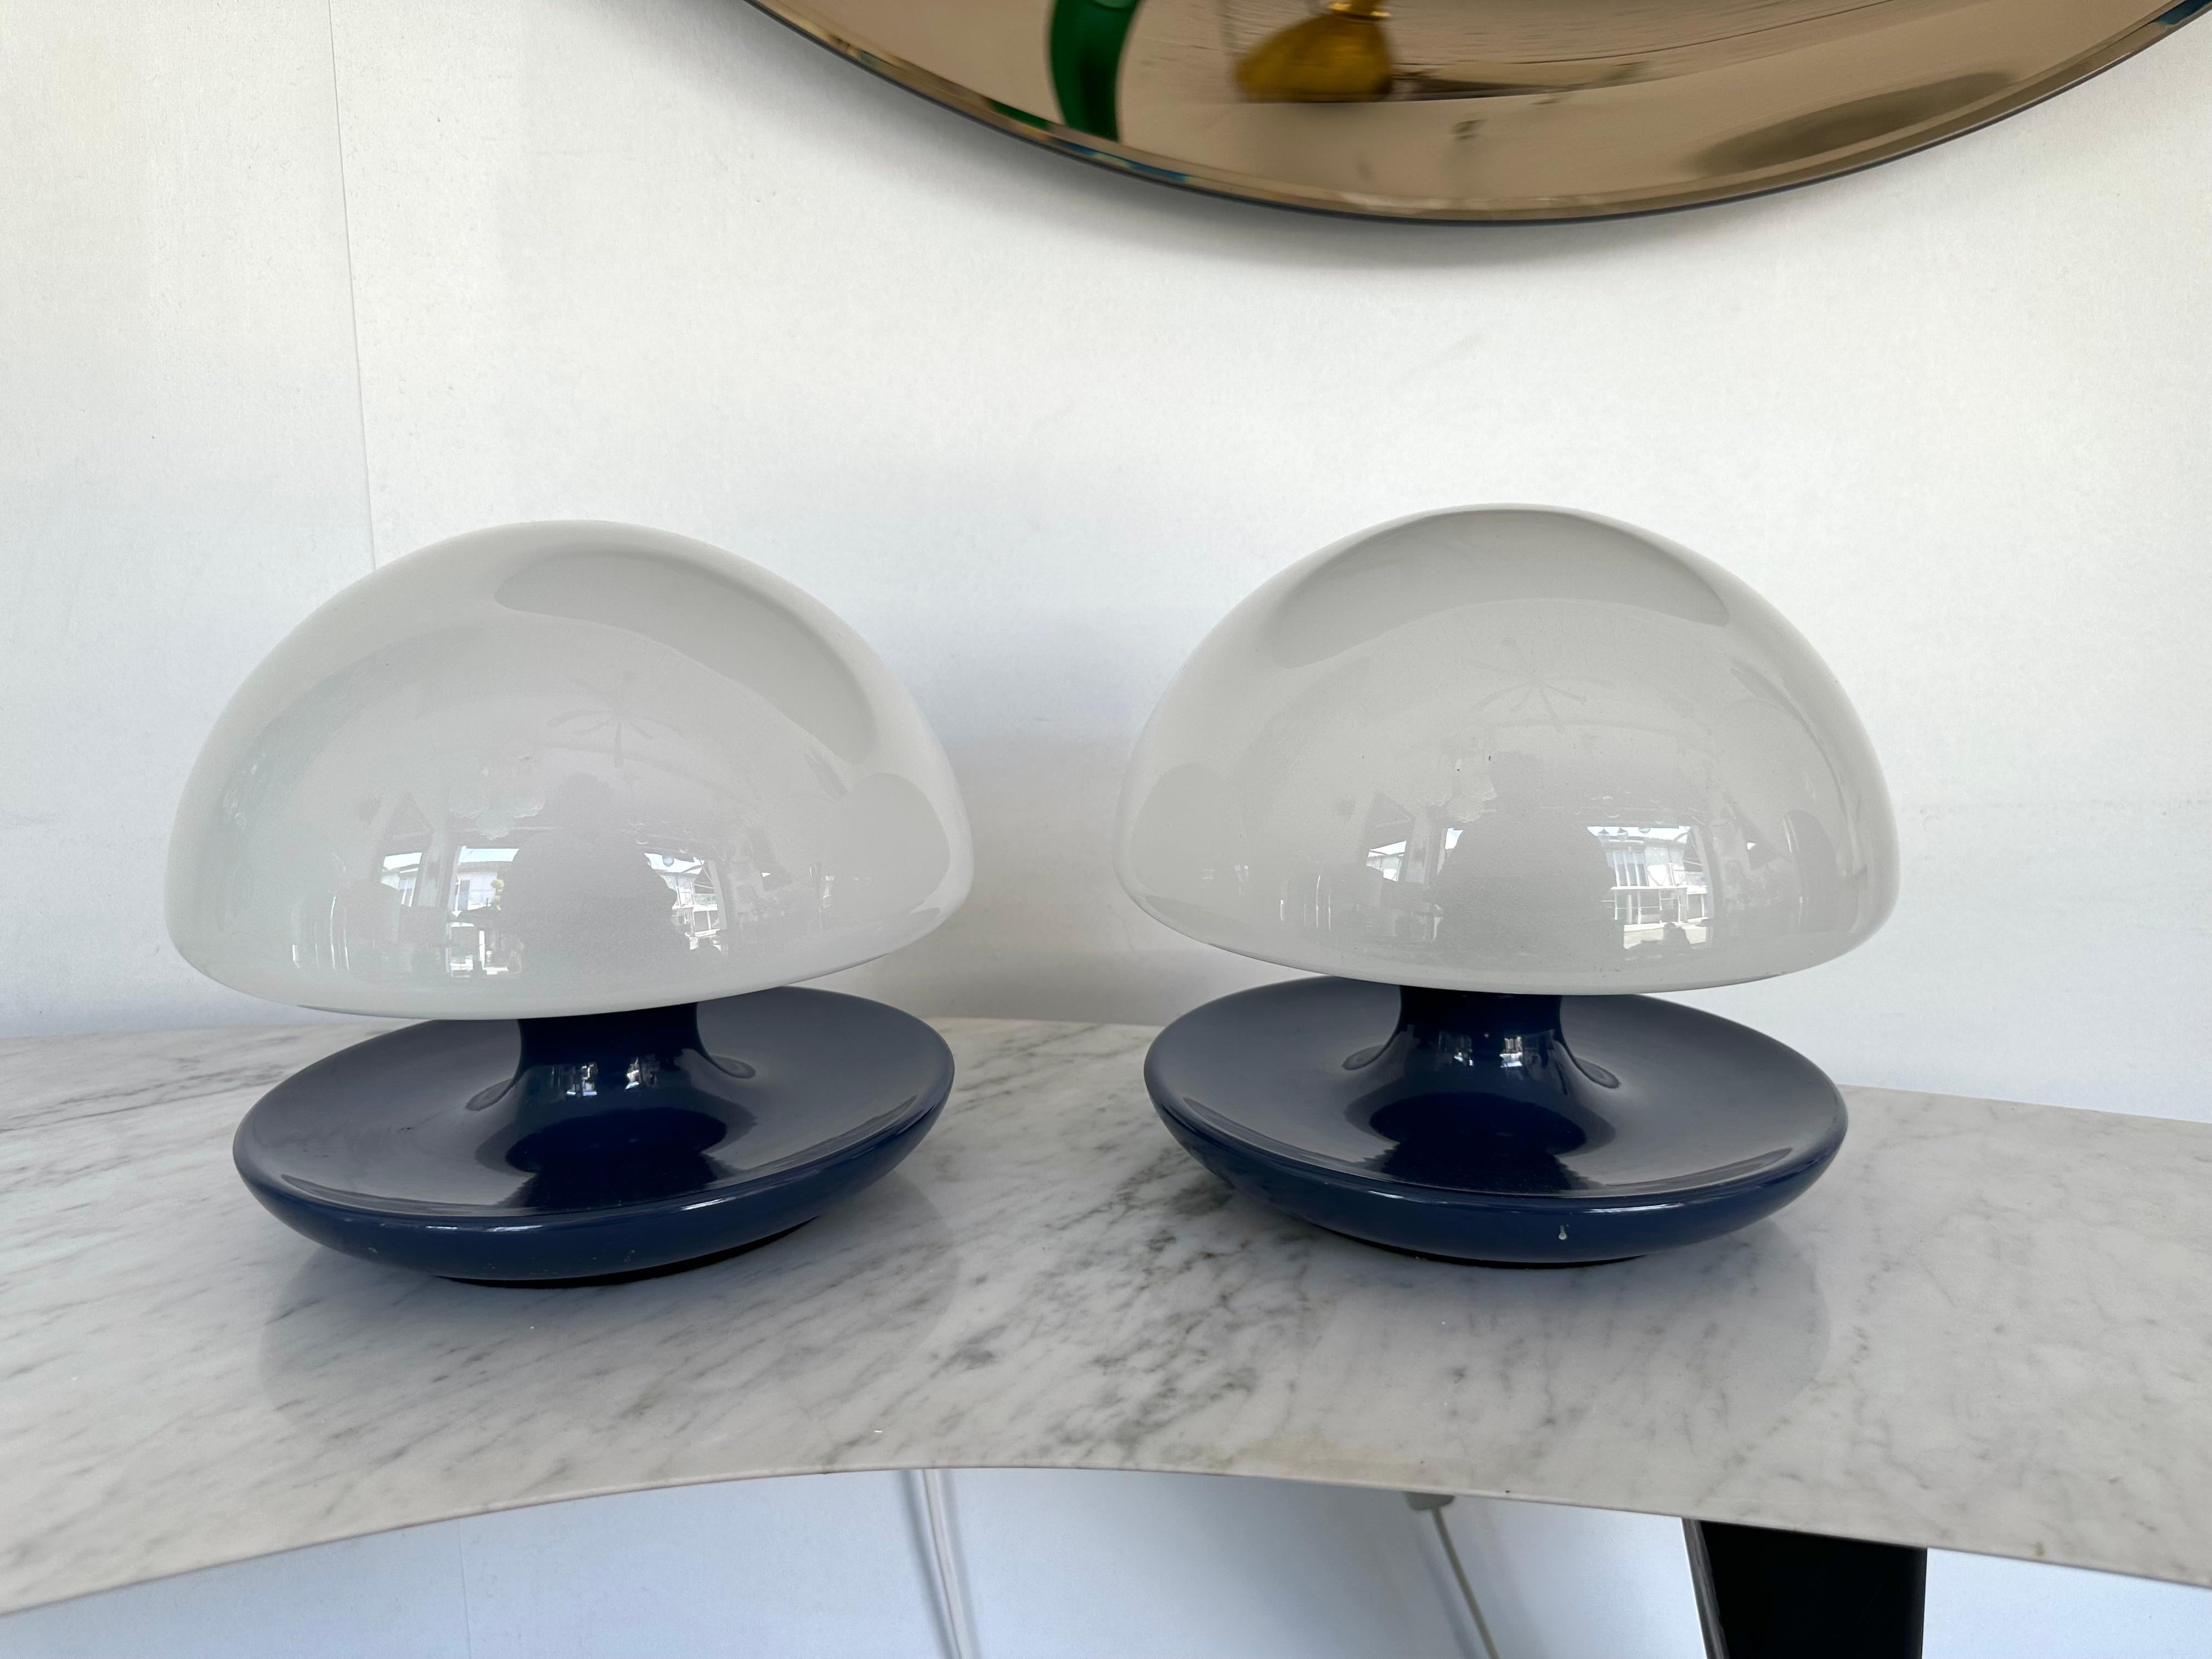 rare pair of table or bedside lamps in blue lacquered metal version and opaline sandblasted glass by the italian designer Vittorio Balli for the editor Sirrah. Rare brass version. Famous design like Reggiani, Sciolari, Stilux, Stilnovo, Angelo